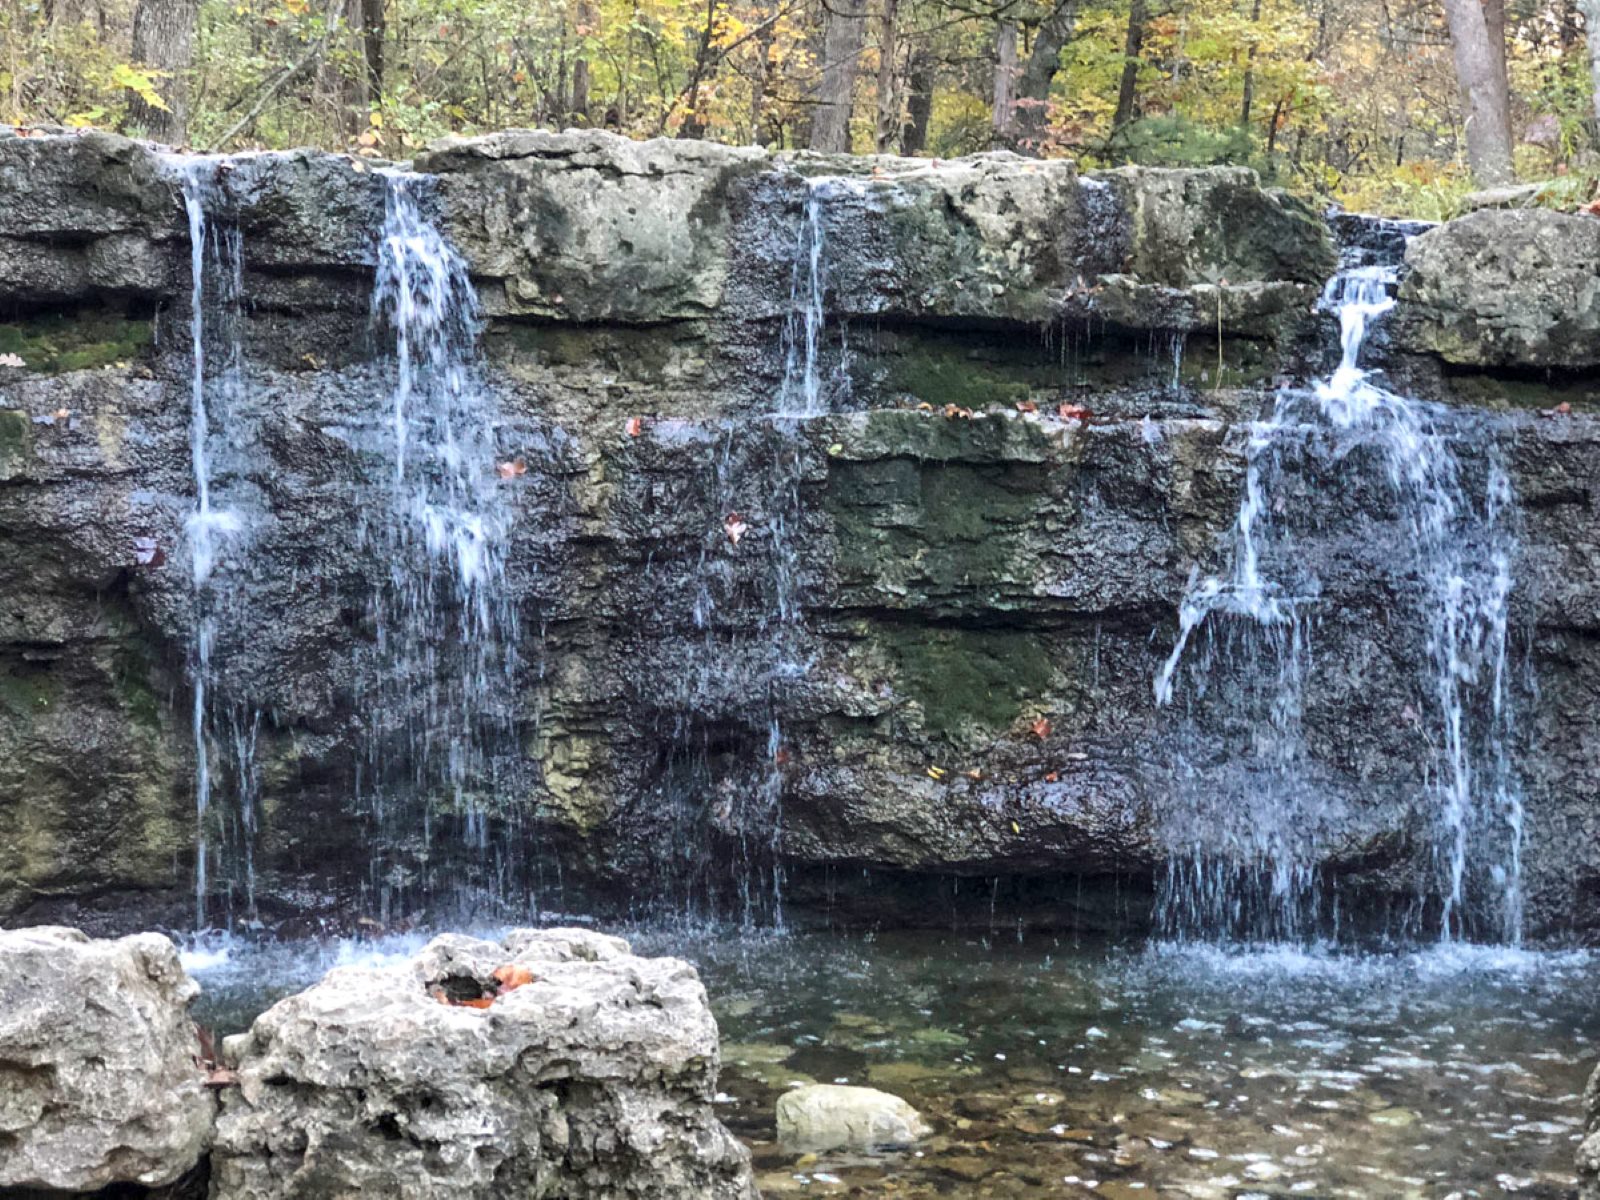 A short, somewhat urban trail in Branson leads to this waterfall on a tributary of Roark Creek. (Photo by Sony Hocklander)